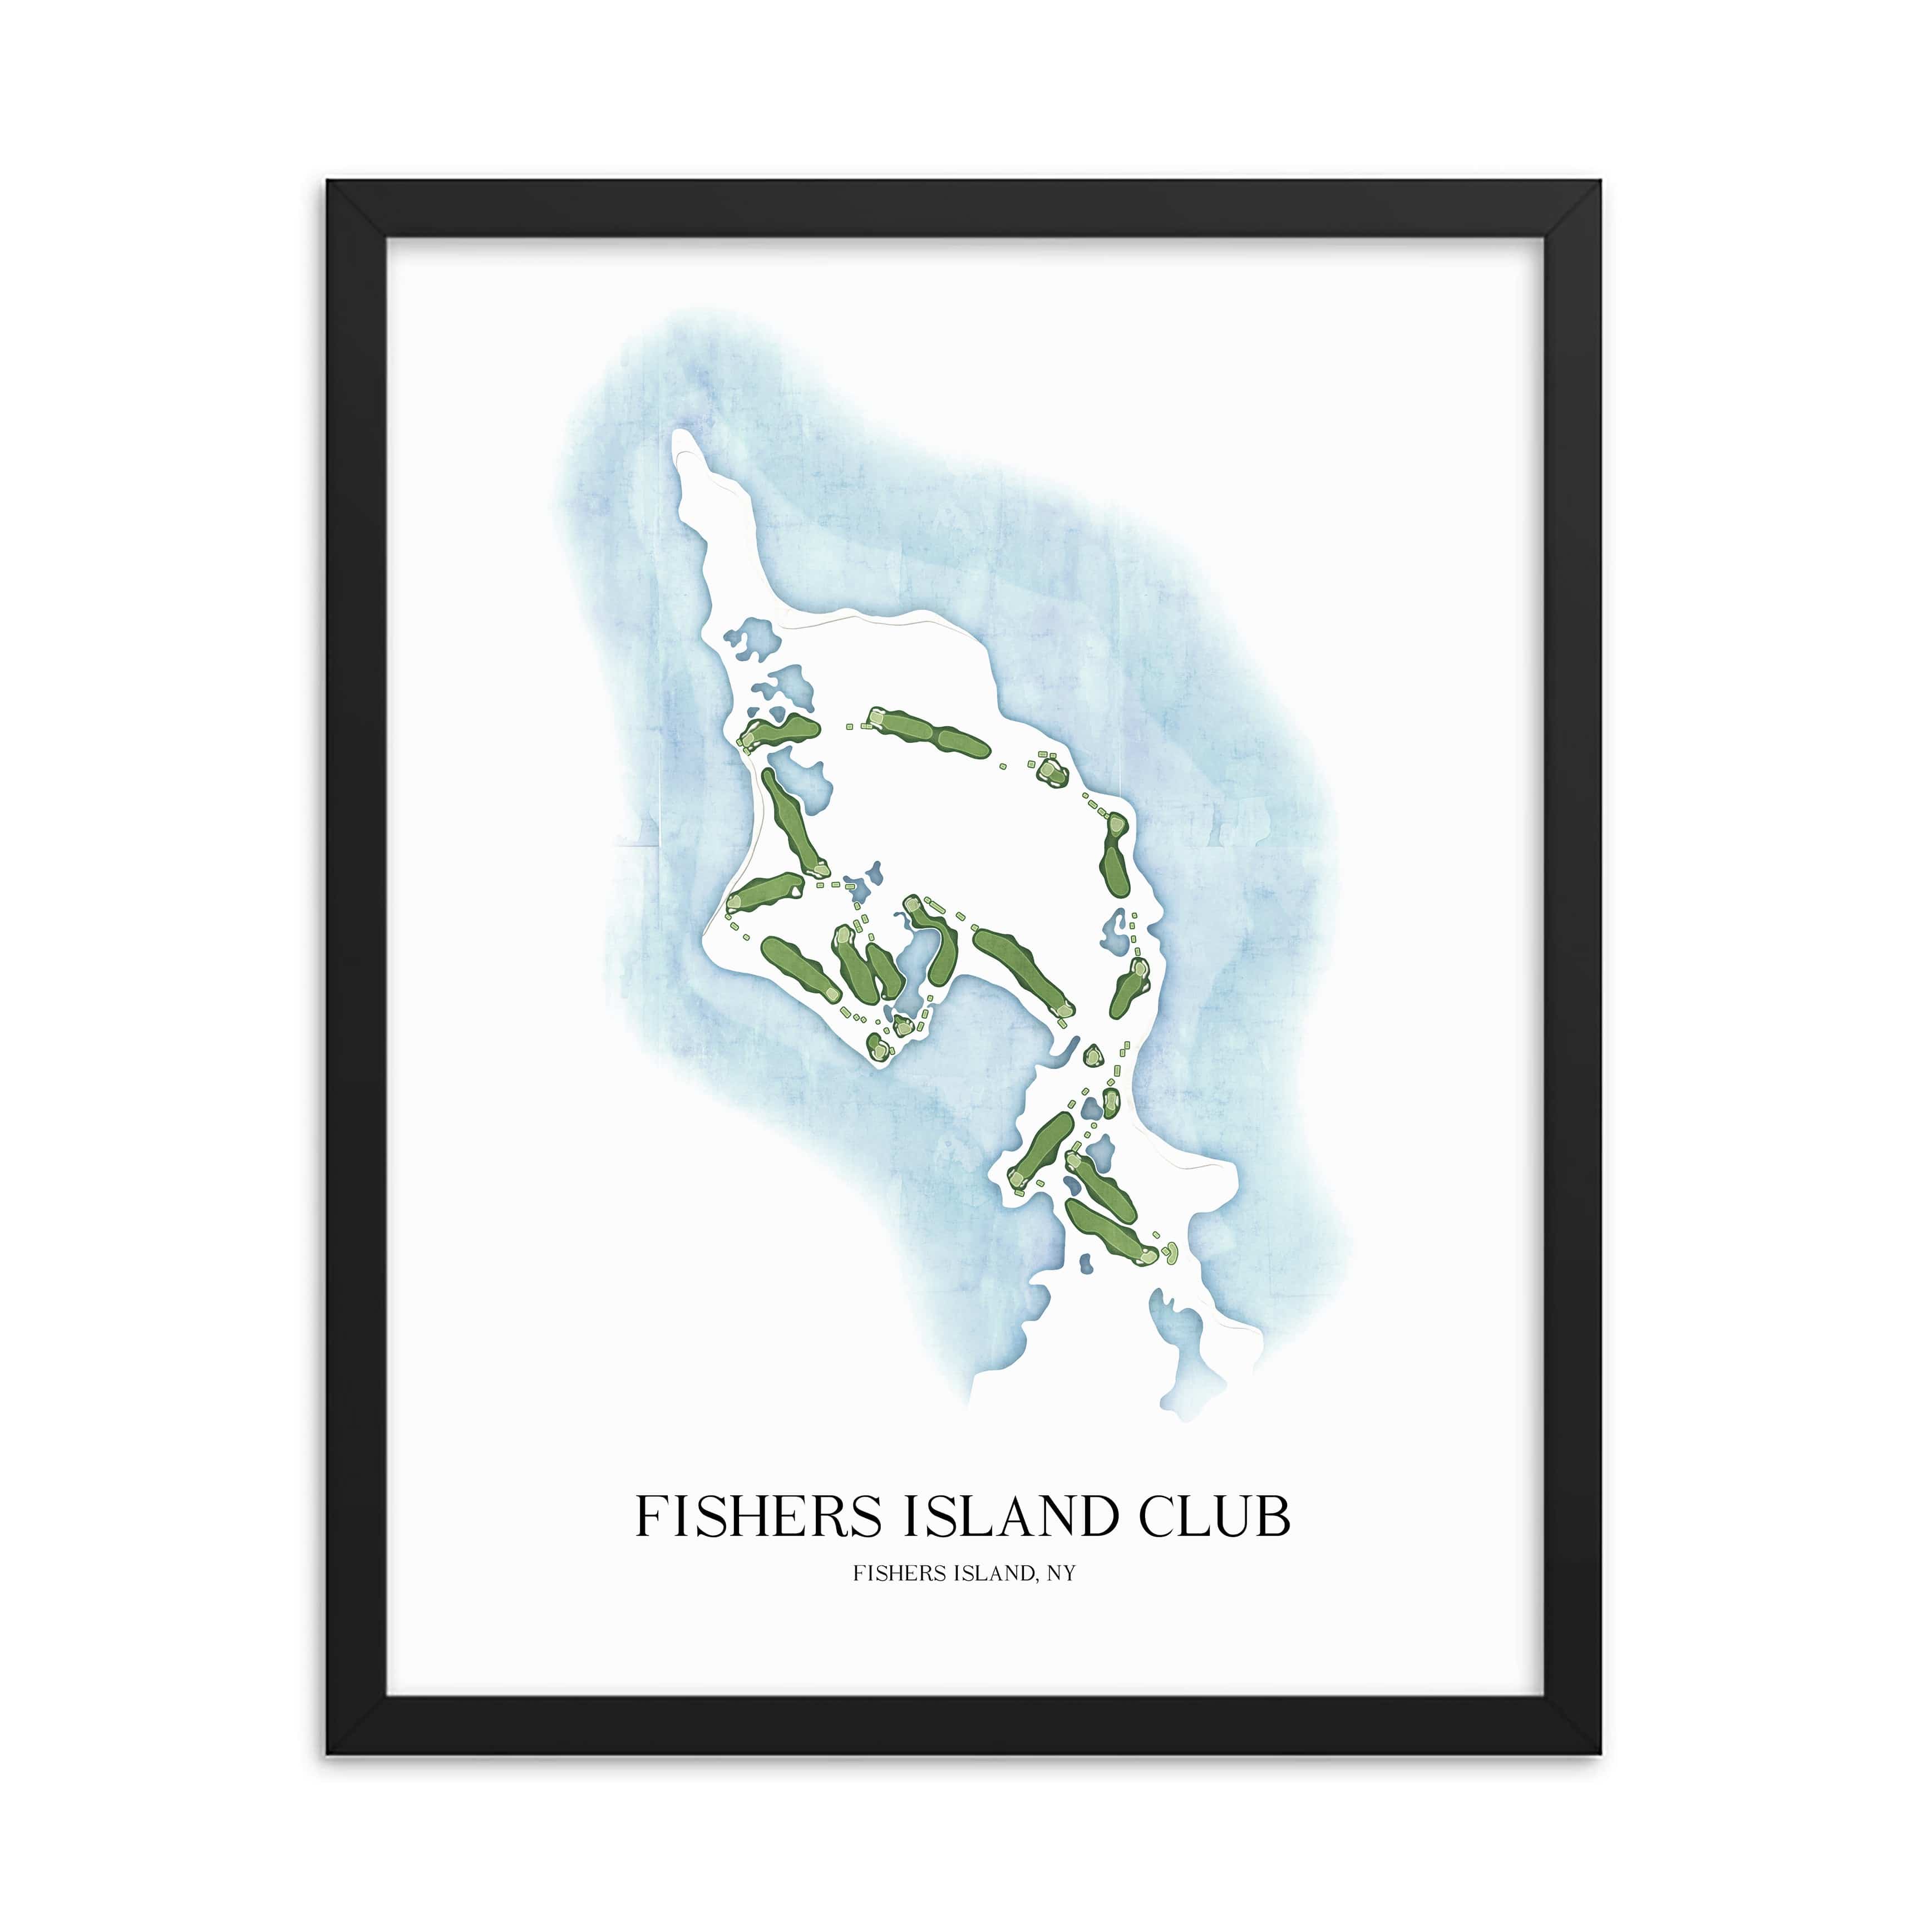 The 19th Hole Golf Shop - Golf Course Prints -  8" x 10" / Black Fishers Island Club Golf Course Map